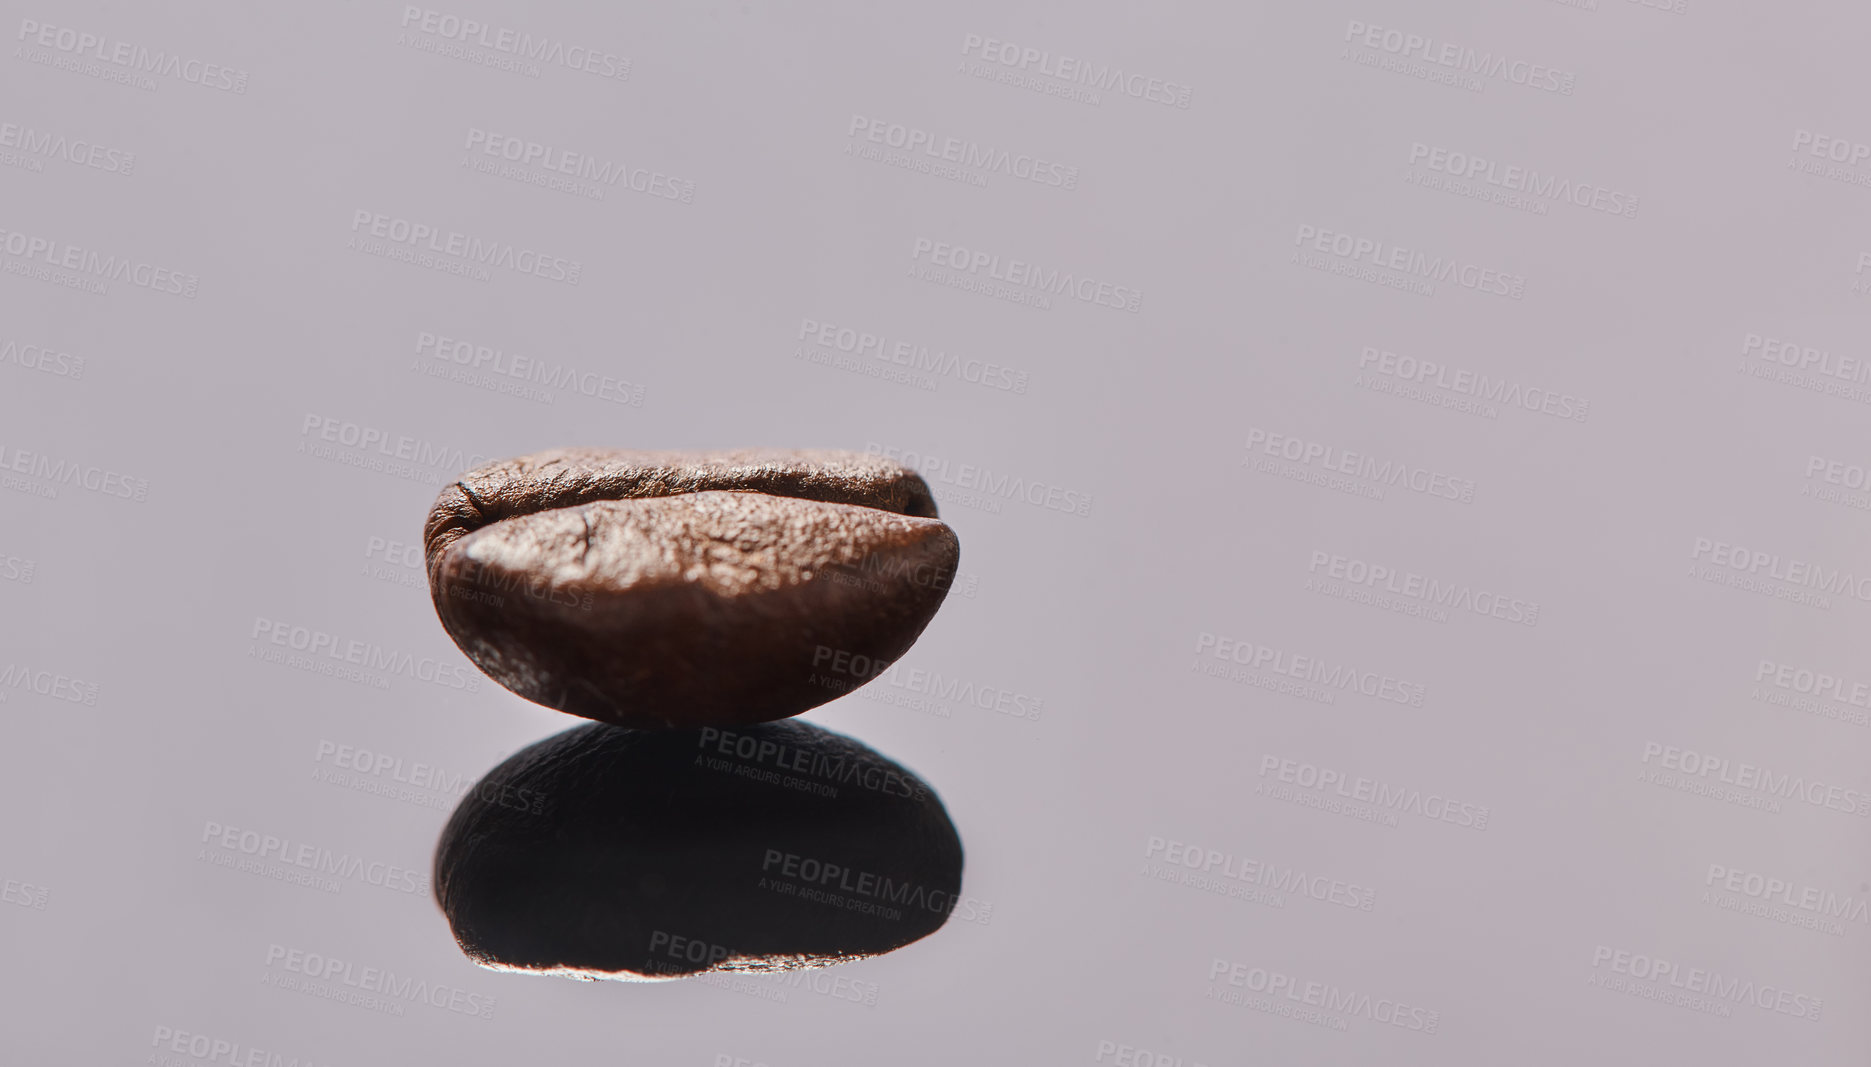 Buy stock photo Studio shot of a coffee bean lying on a grey tabletop